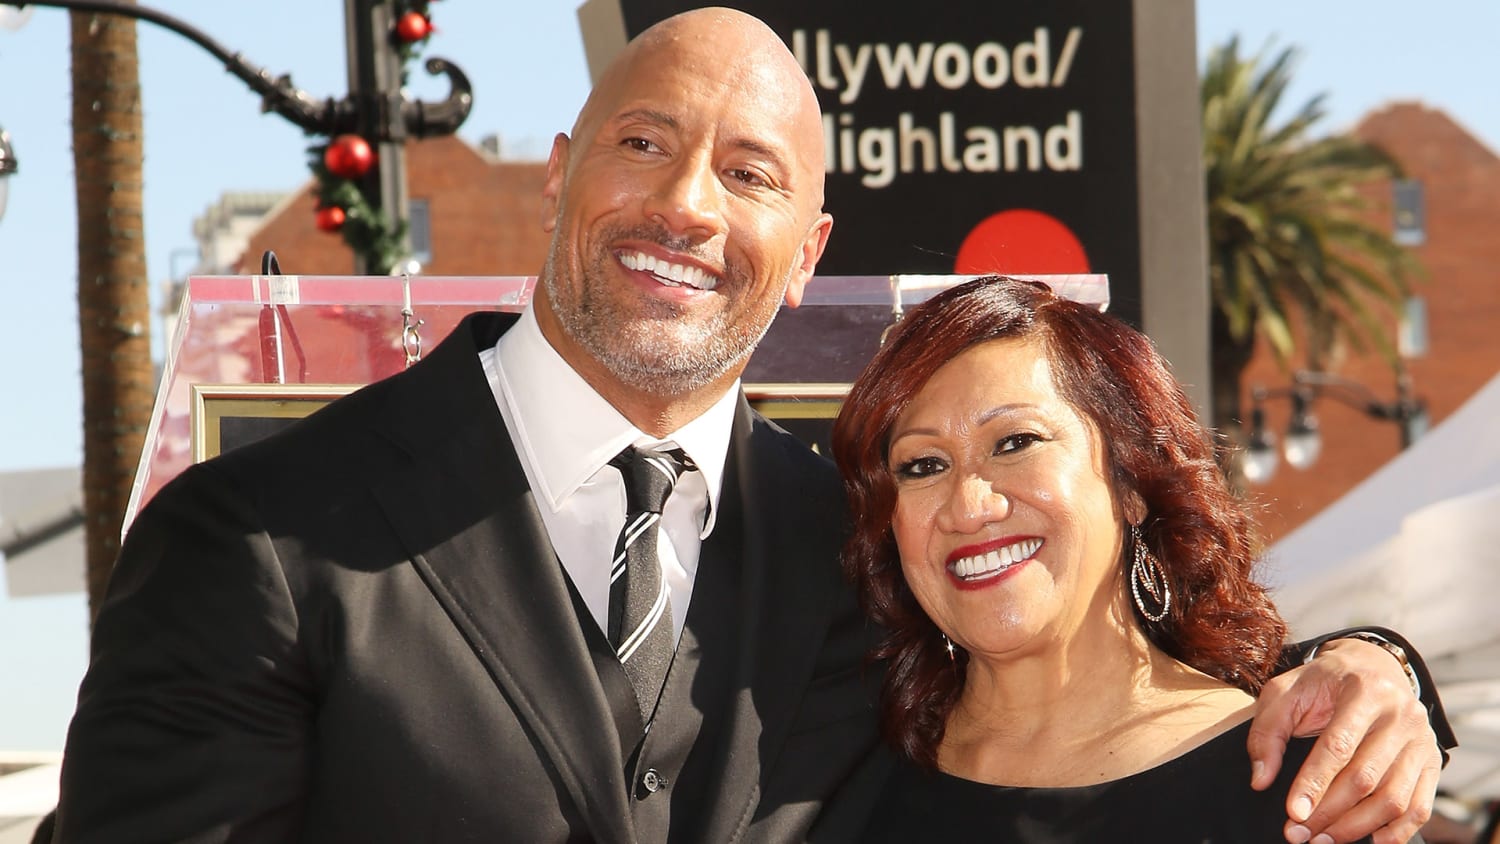 Dwayne Johnson reveals he saved his mother's life when he was 15